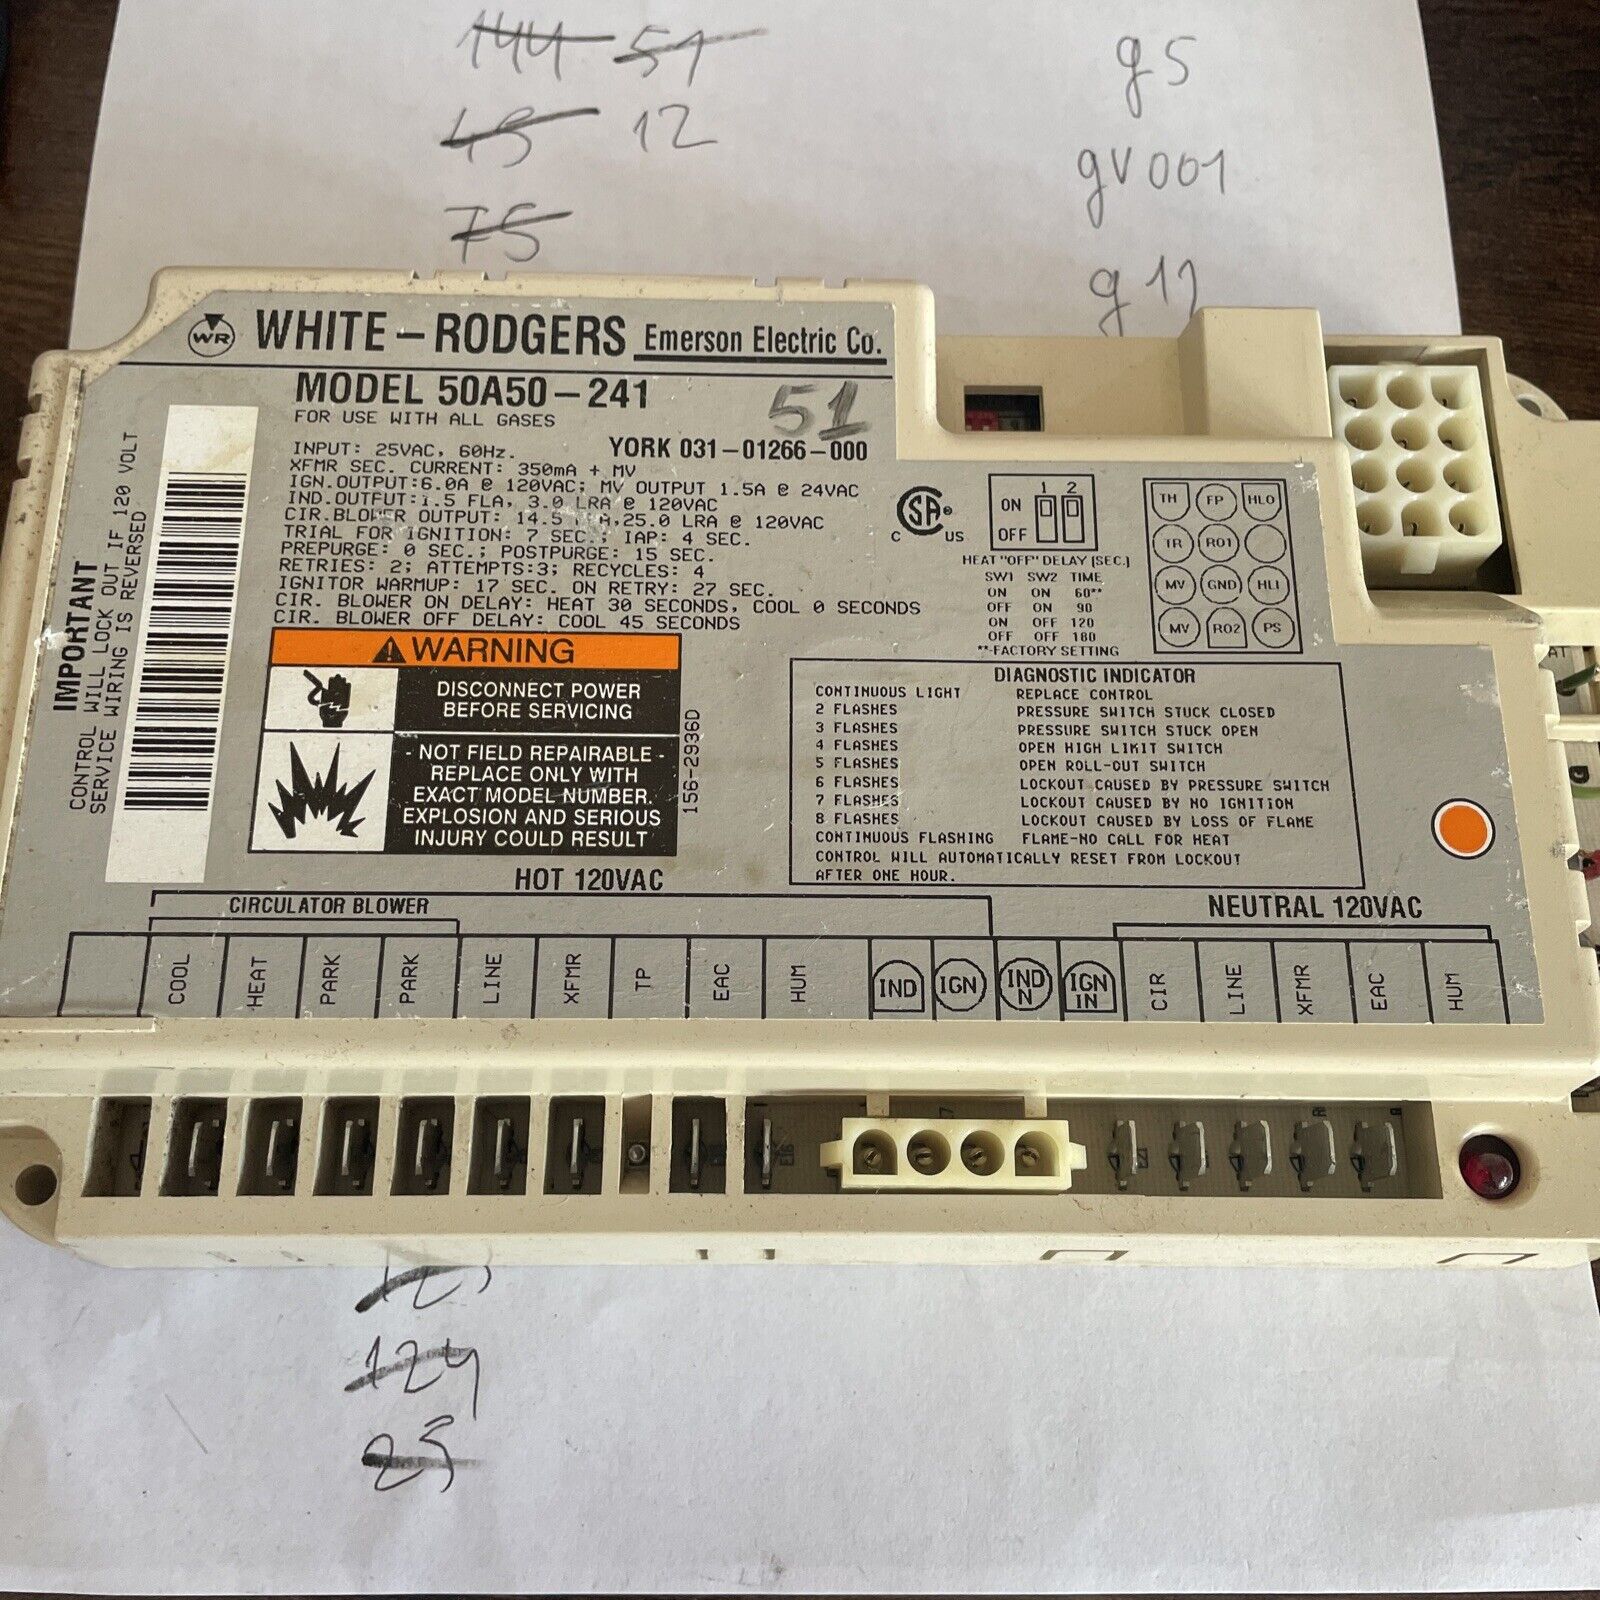 White Rodgers 50A50-241 Furnace Control Board - 031-01266-000